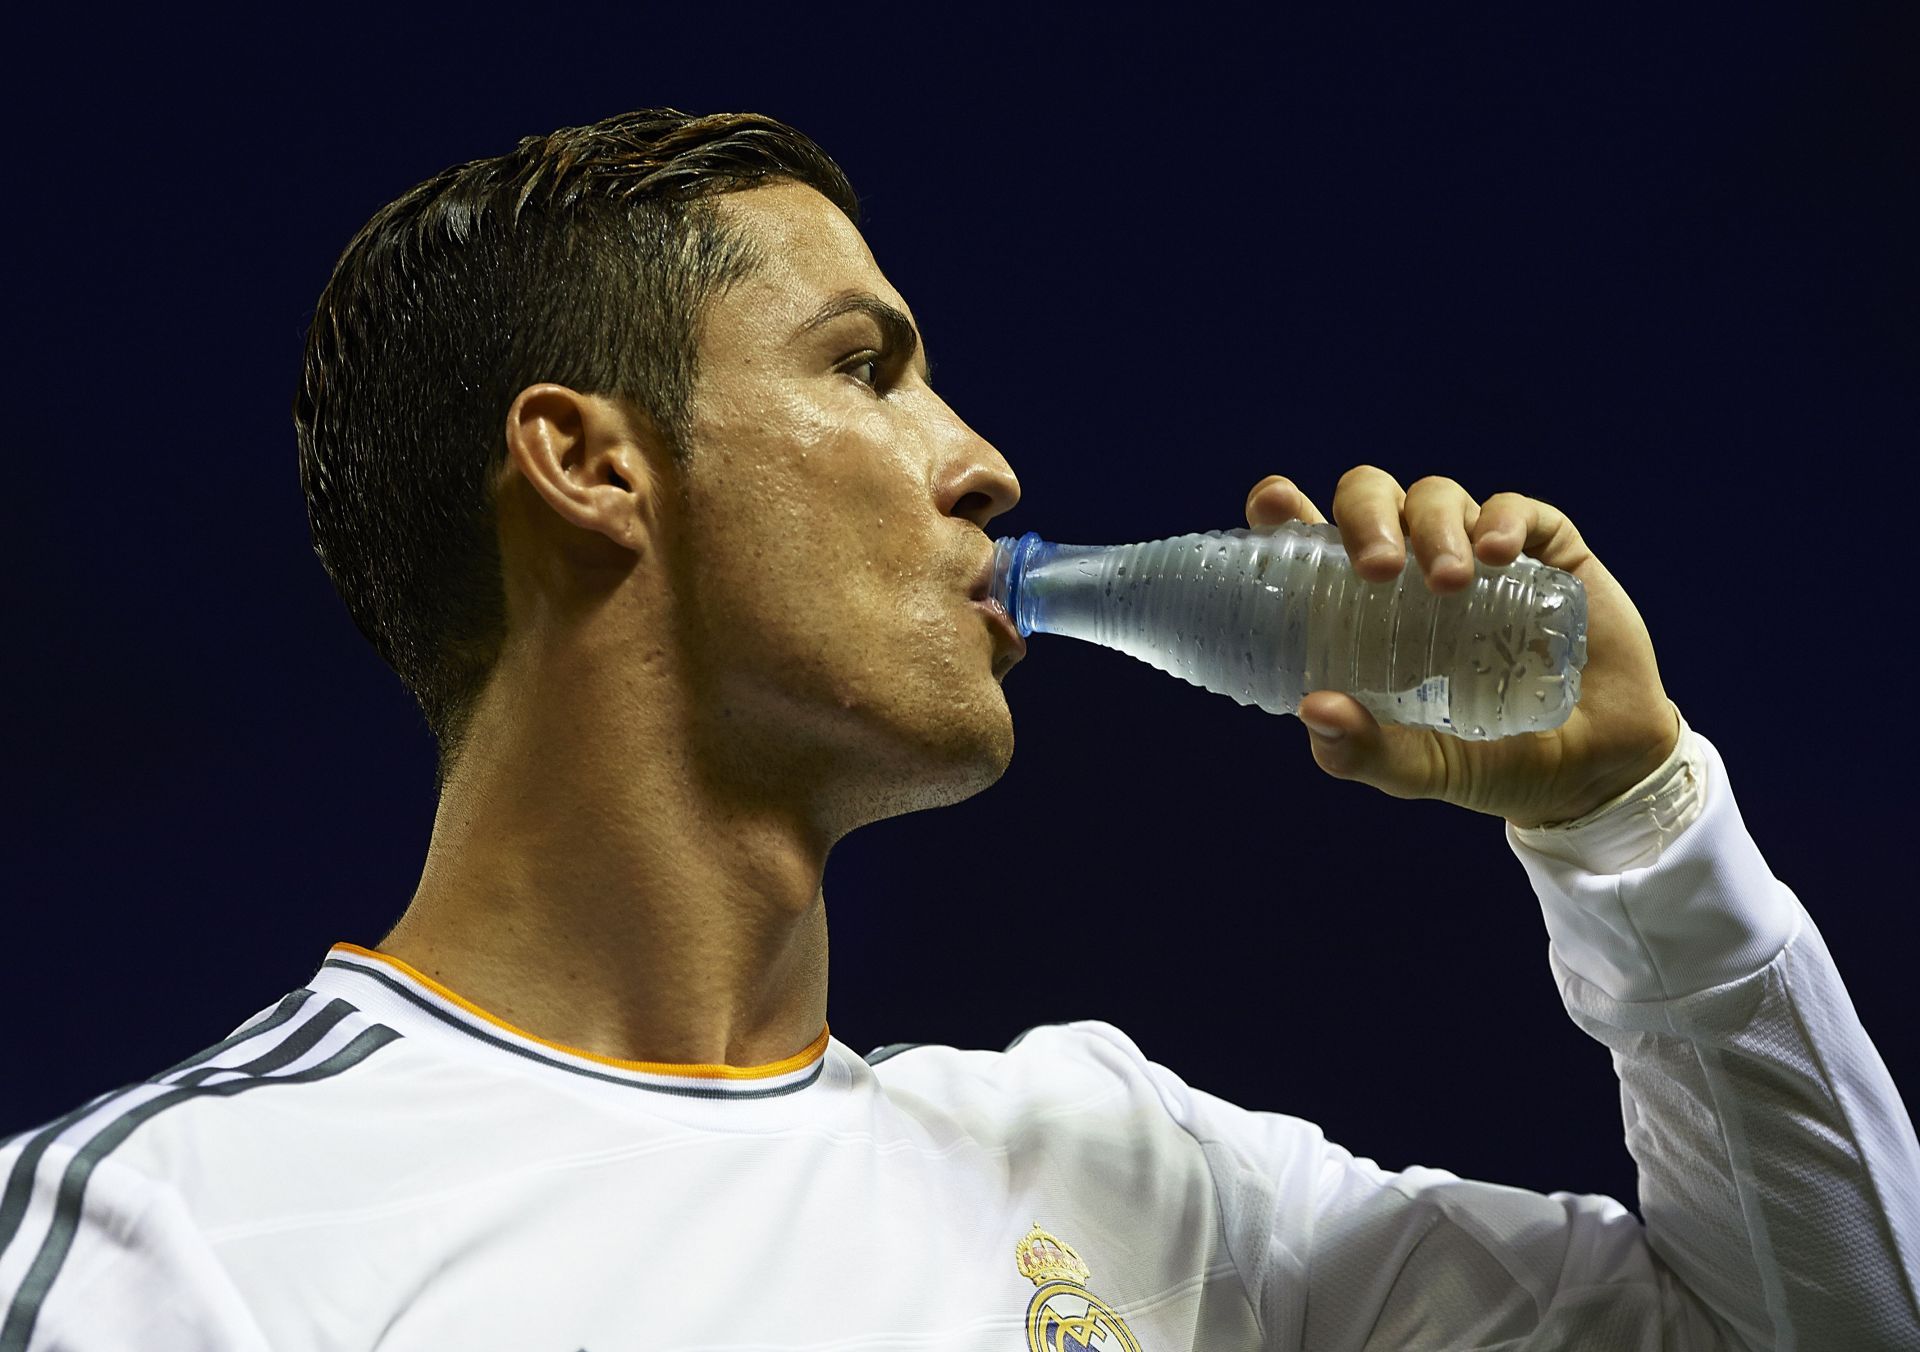 Ronaldo is not a fan of the carbonated drink.